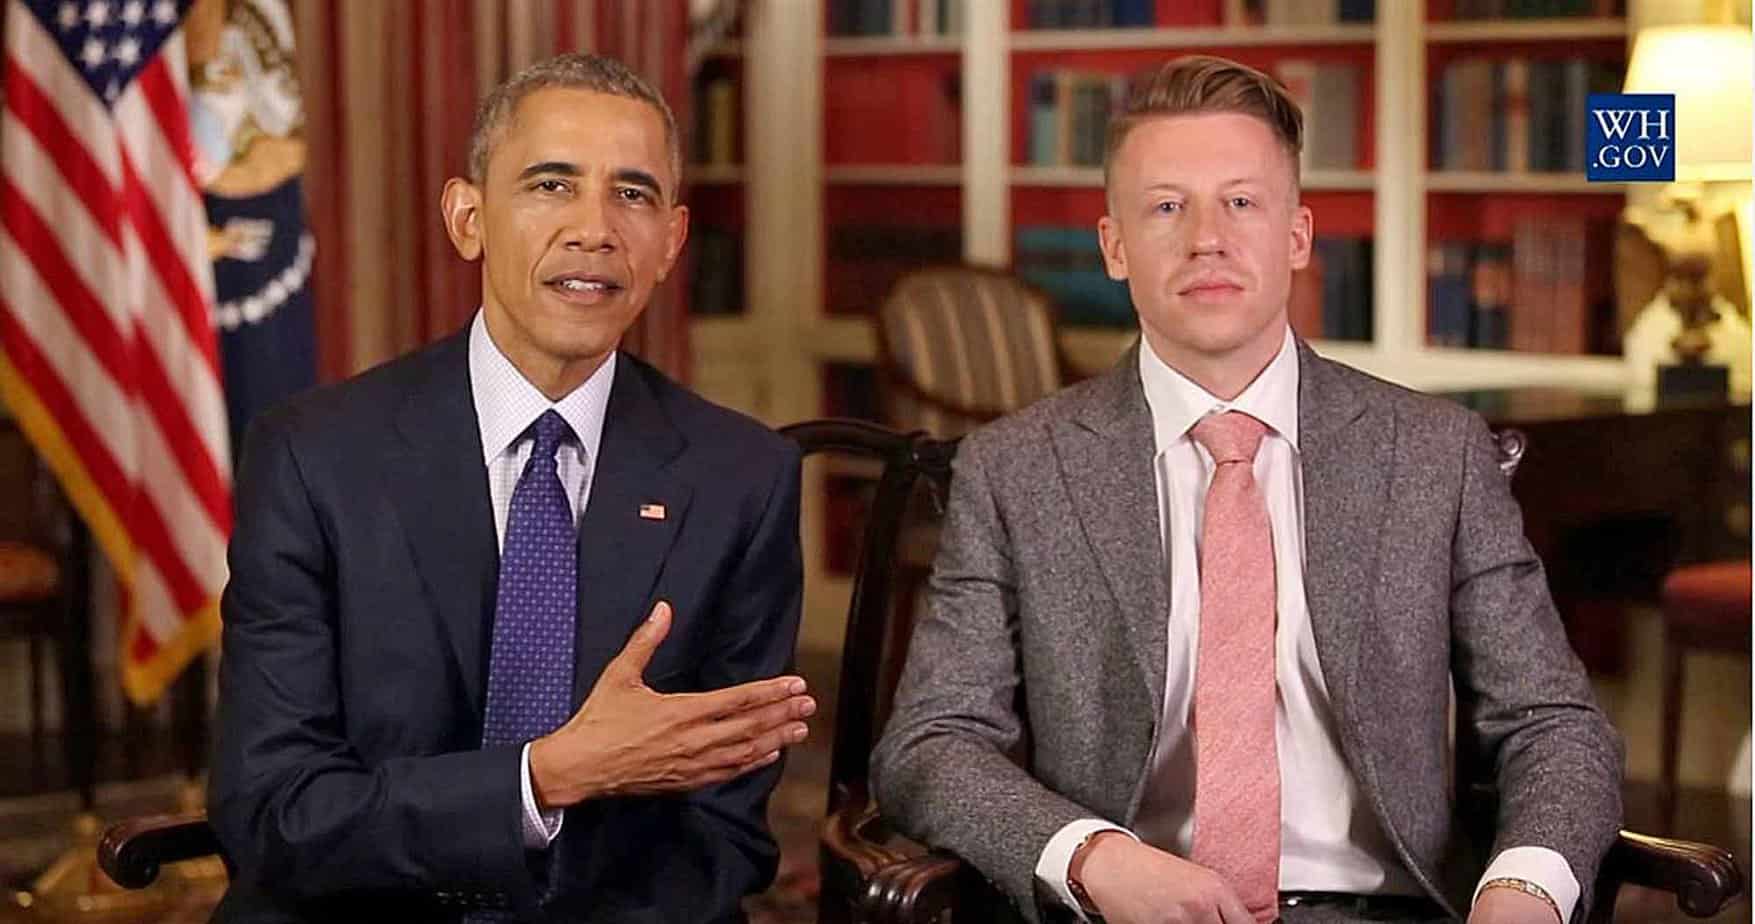 Macklemore and president obama sitting next to each other in white house oval office